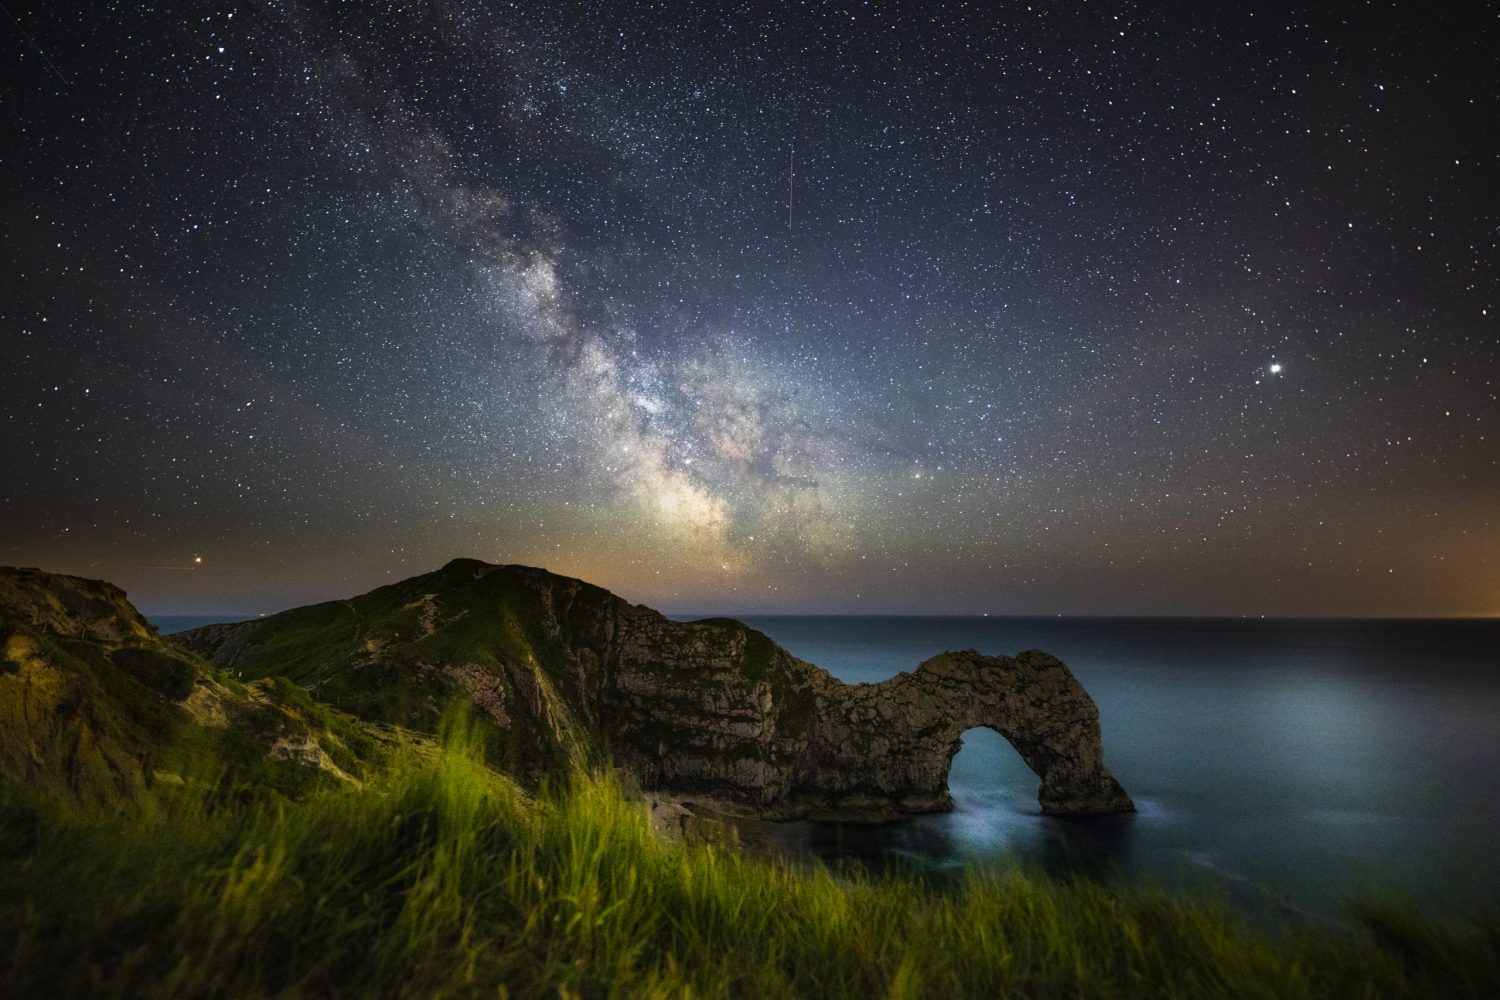 How to see the Milky Way - BBC Sky at Night Magazine